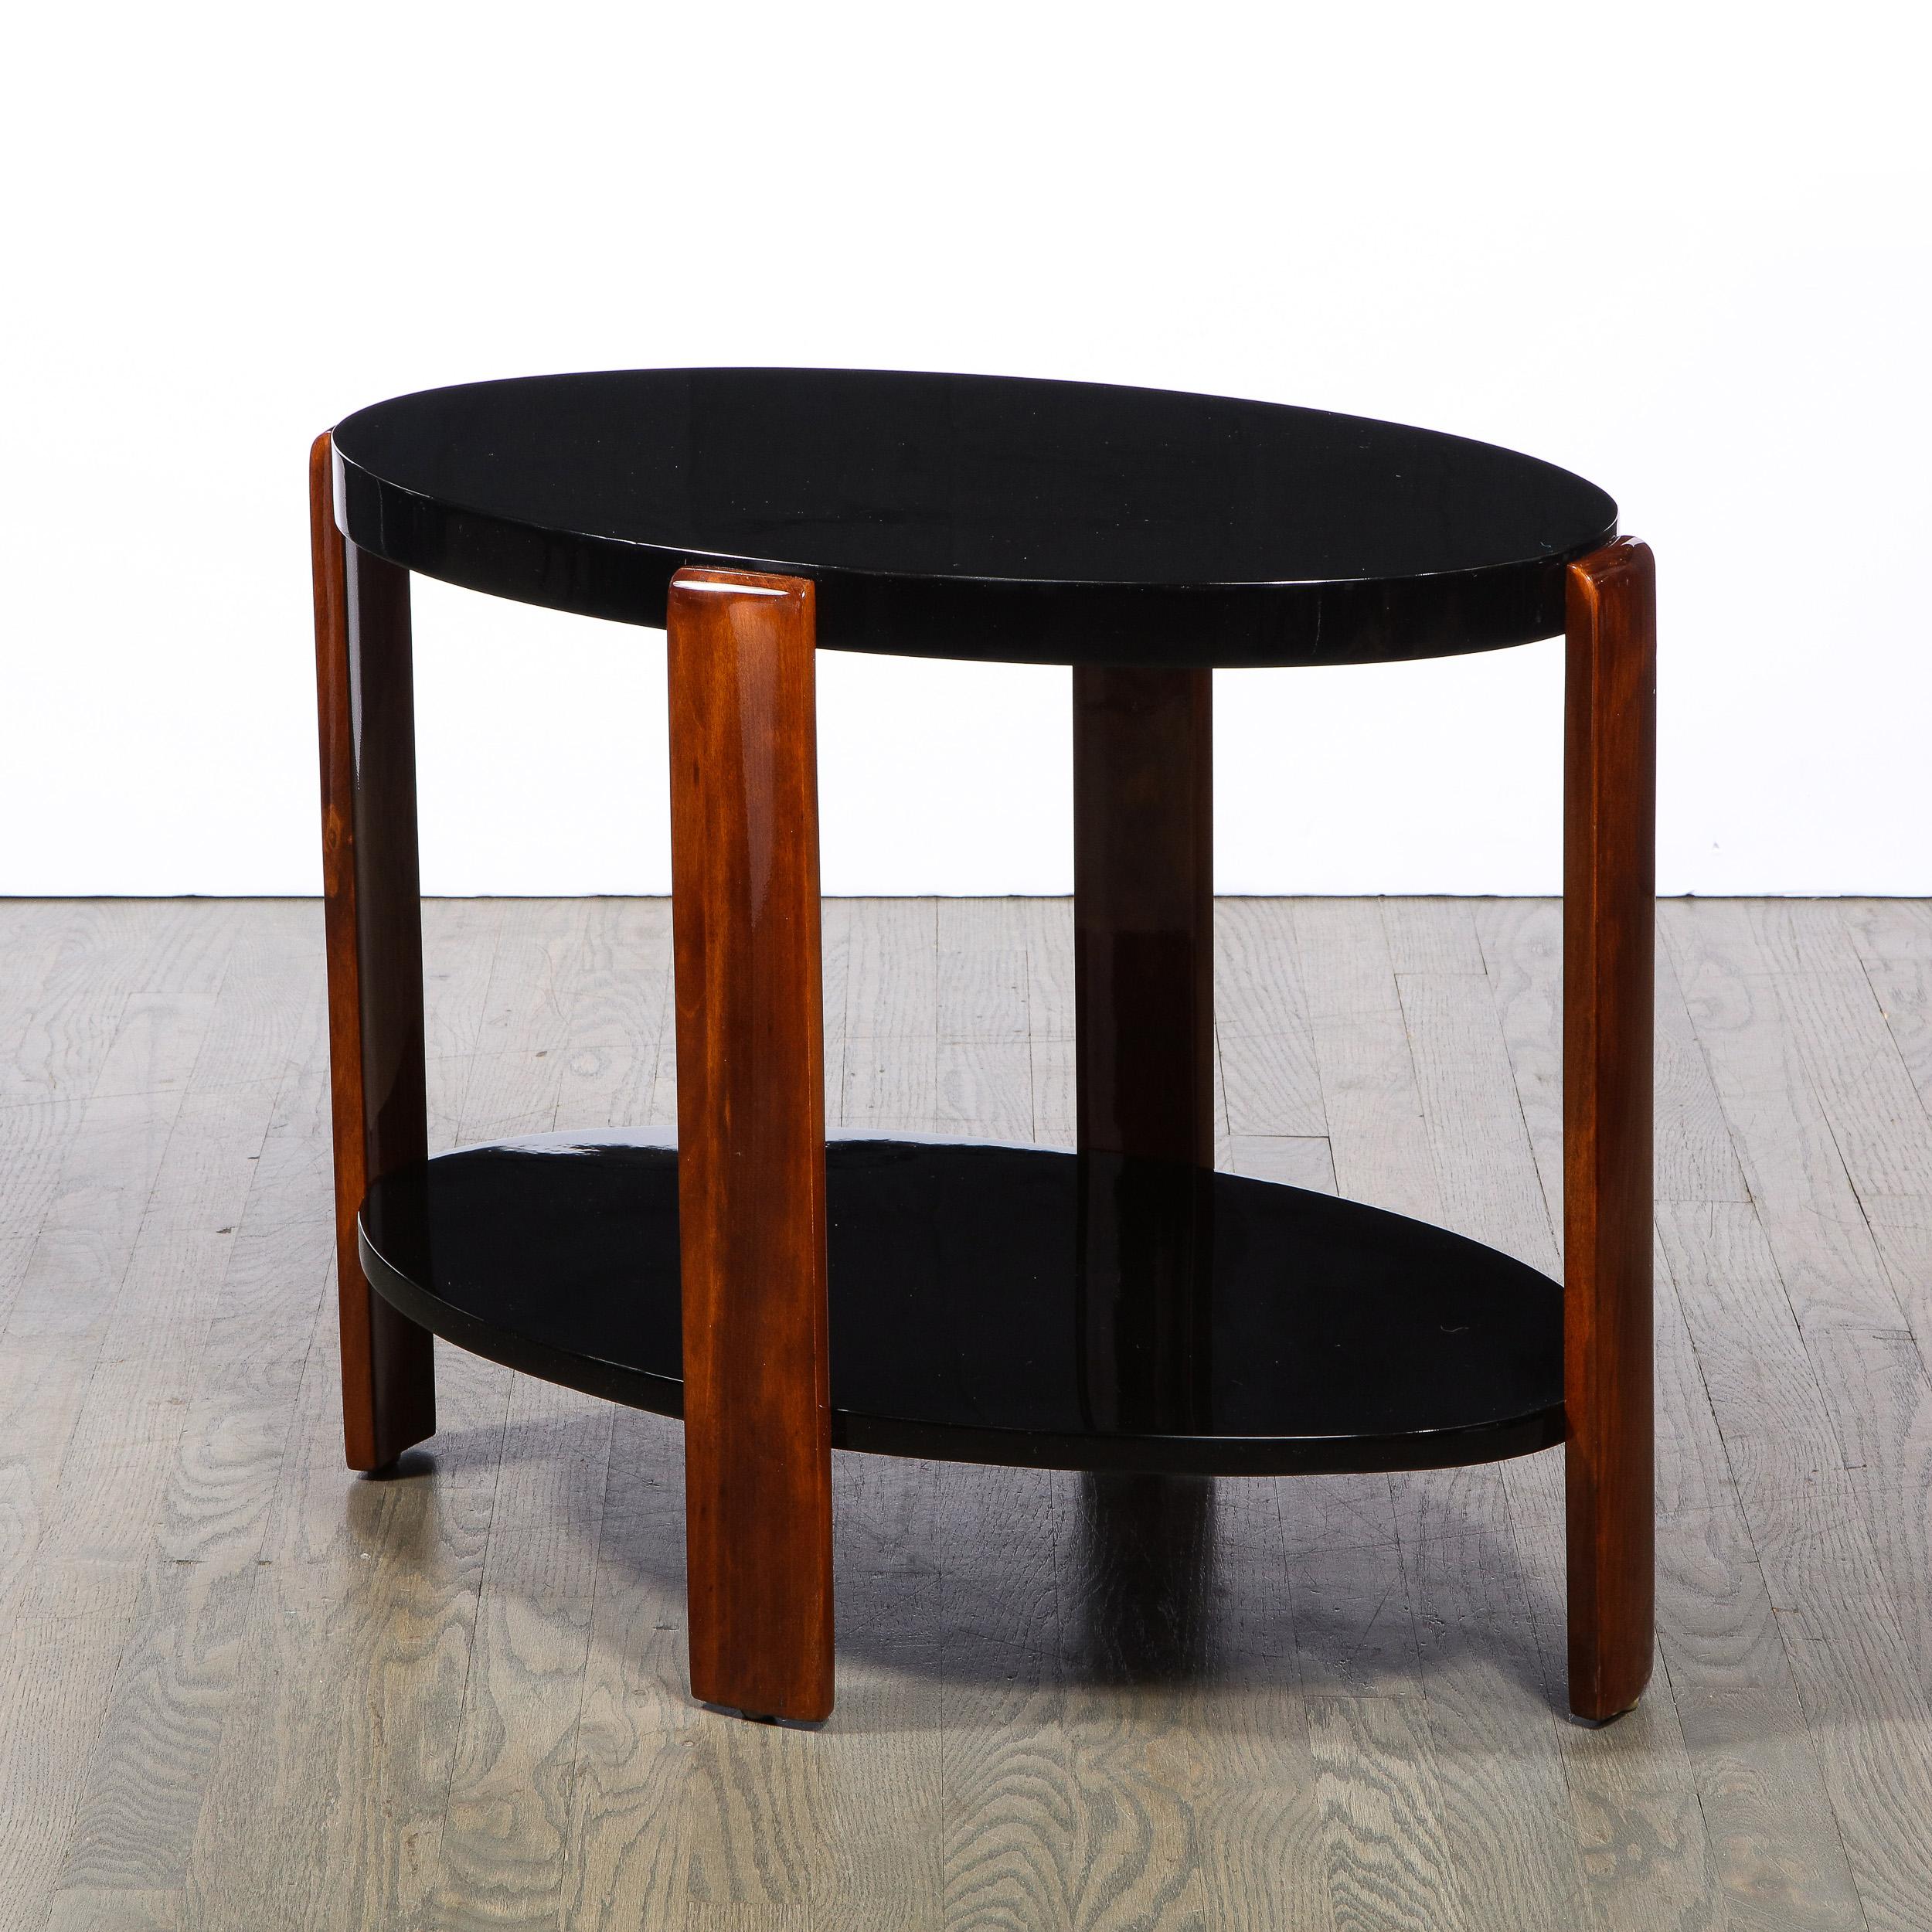 American Art Deco Machine Age Streamlined 2 Tier Black Lacquer & Bookmatched Walnut Table